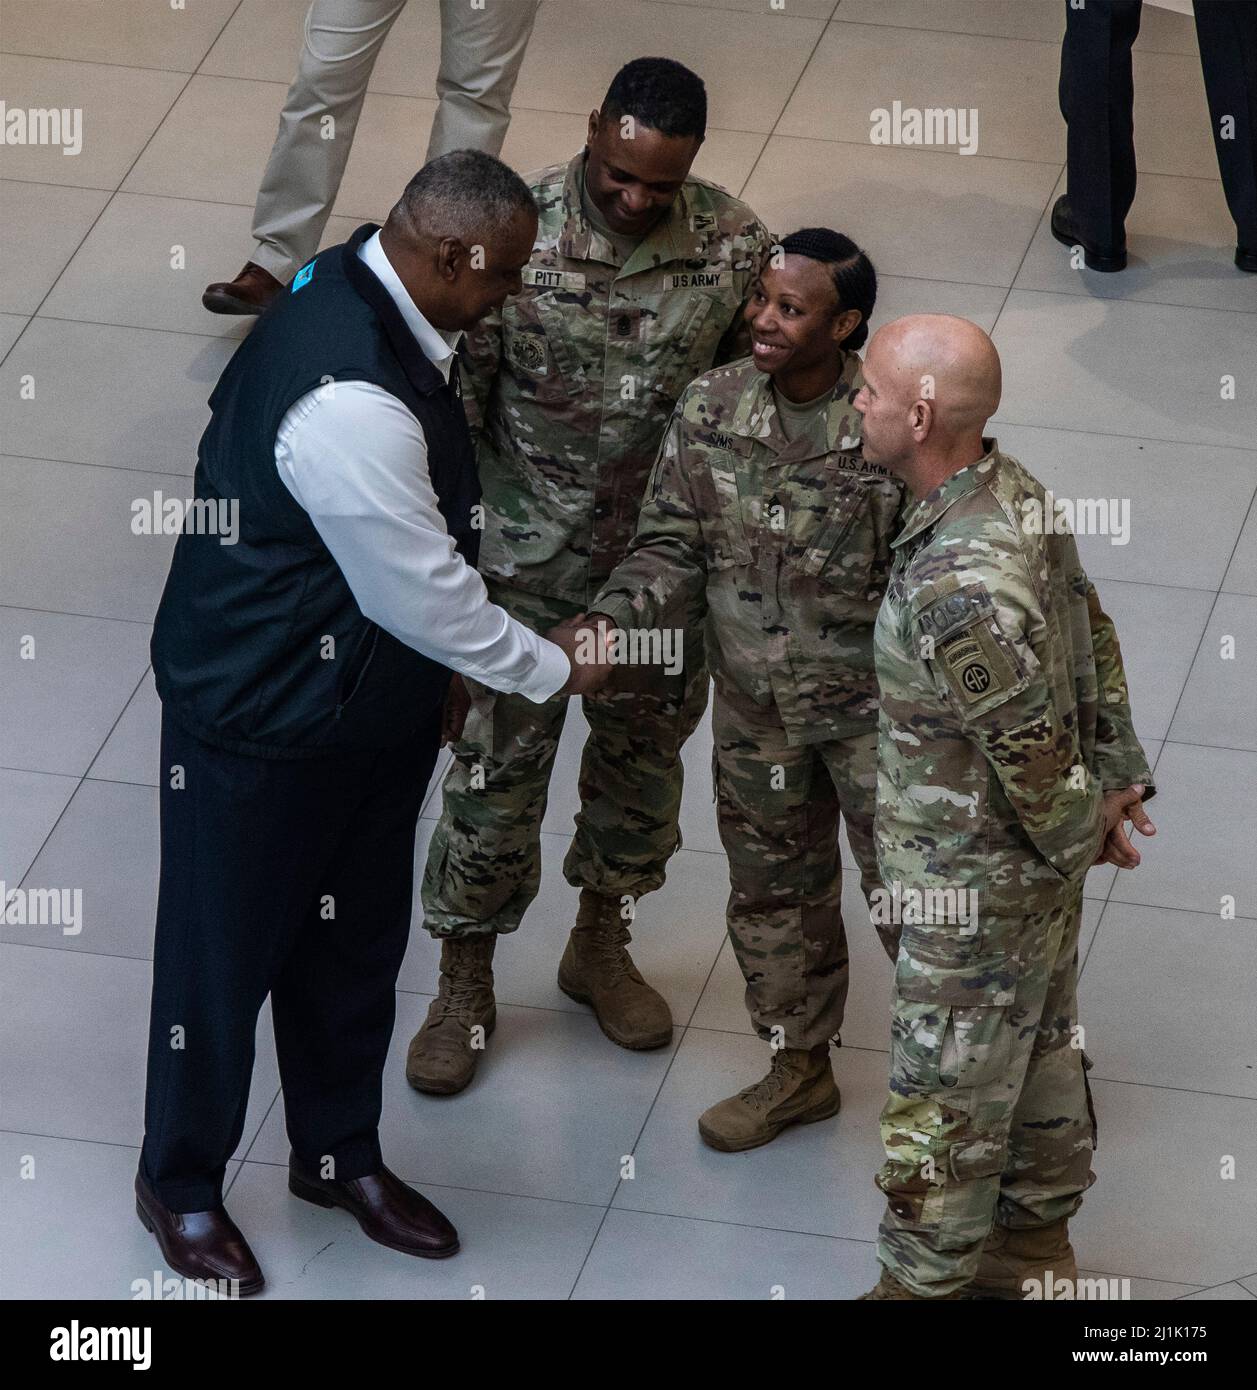 Jasionka, Poland. 25th Mar, 2022. U.S Secretary of Defense Lloyd Austin, left, greets CSM Tonya Sims, center with the 82nd Airborne Division Sustainment Brigade, during a visit with President Joe Biden, March 25, 2022 in Jasionka, Poland. Credit: Sgt. Gerald Holman/U.S. Army/Alamy Live News Stock Photo